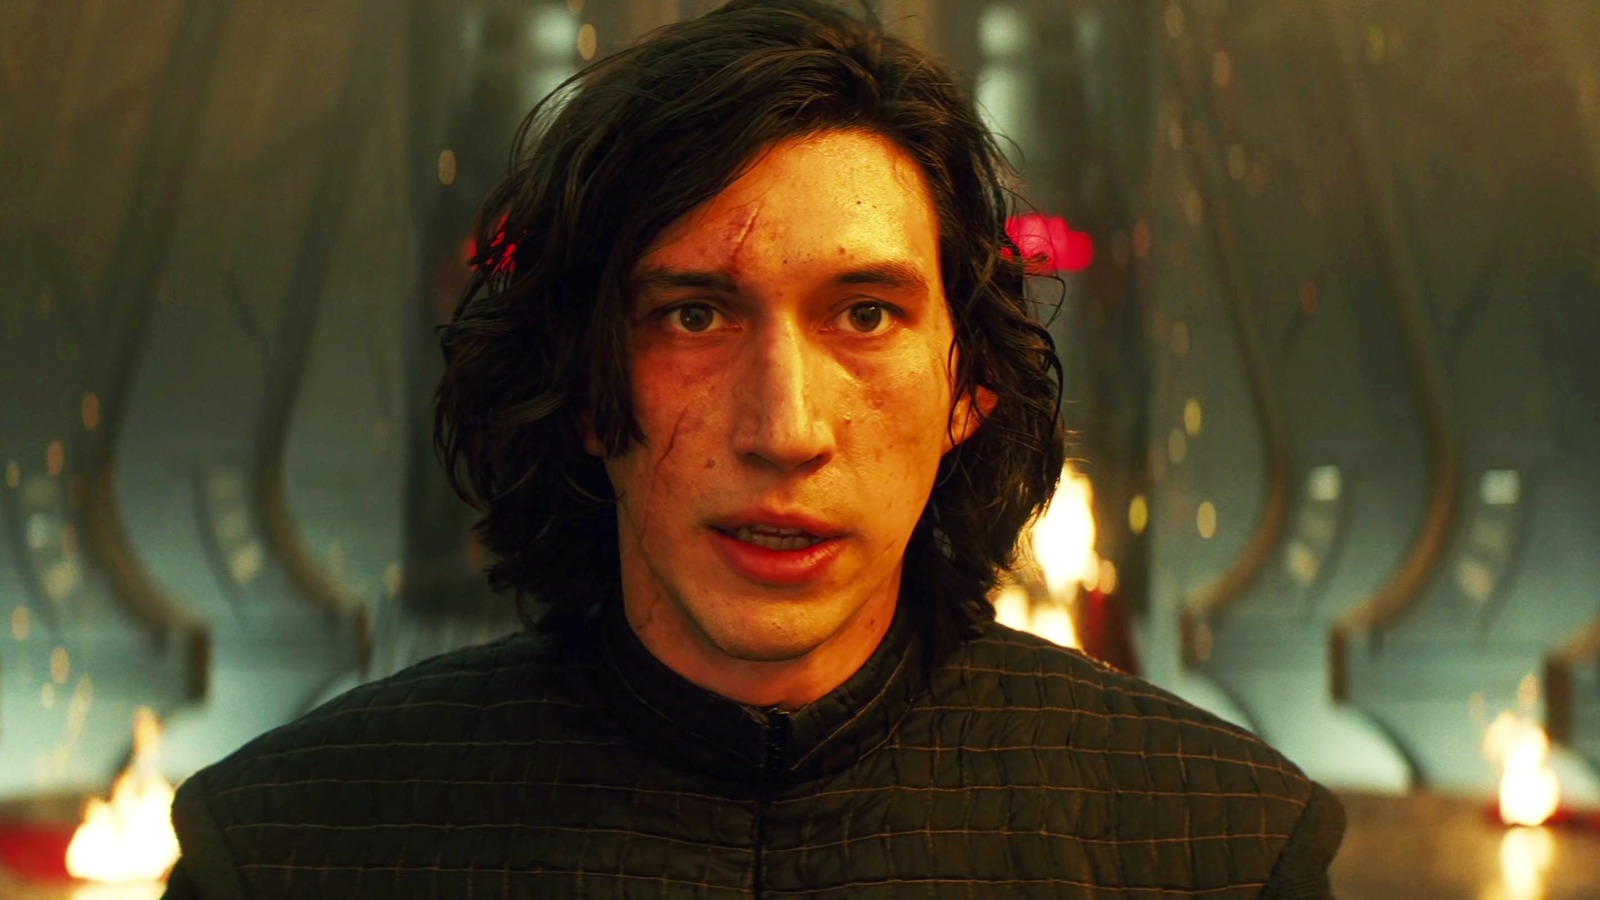 Adam Driver Found Star Wars 'Exhausting' - But Admits It Was His Fault